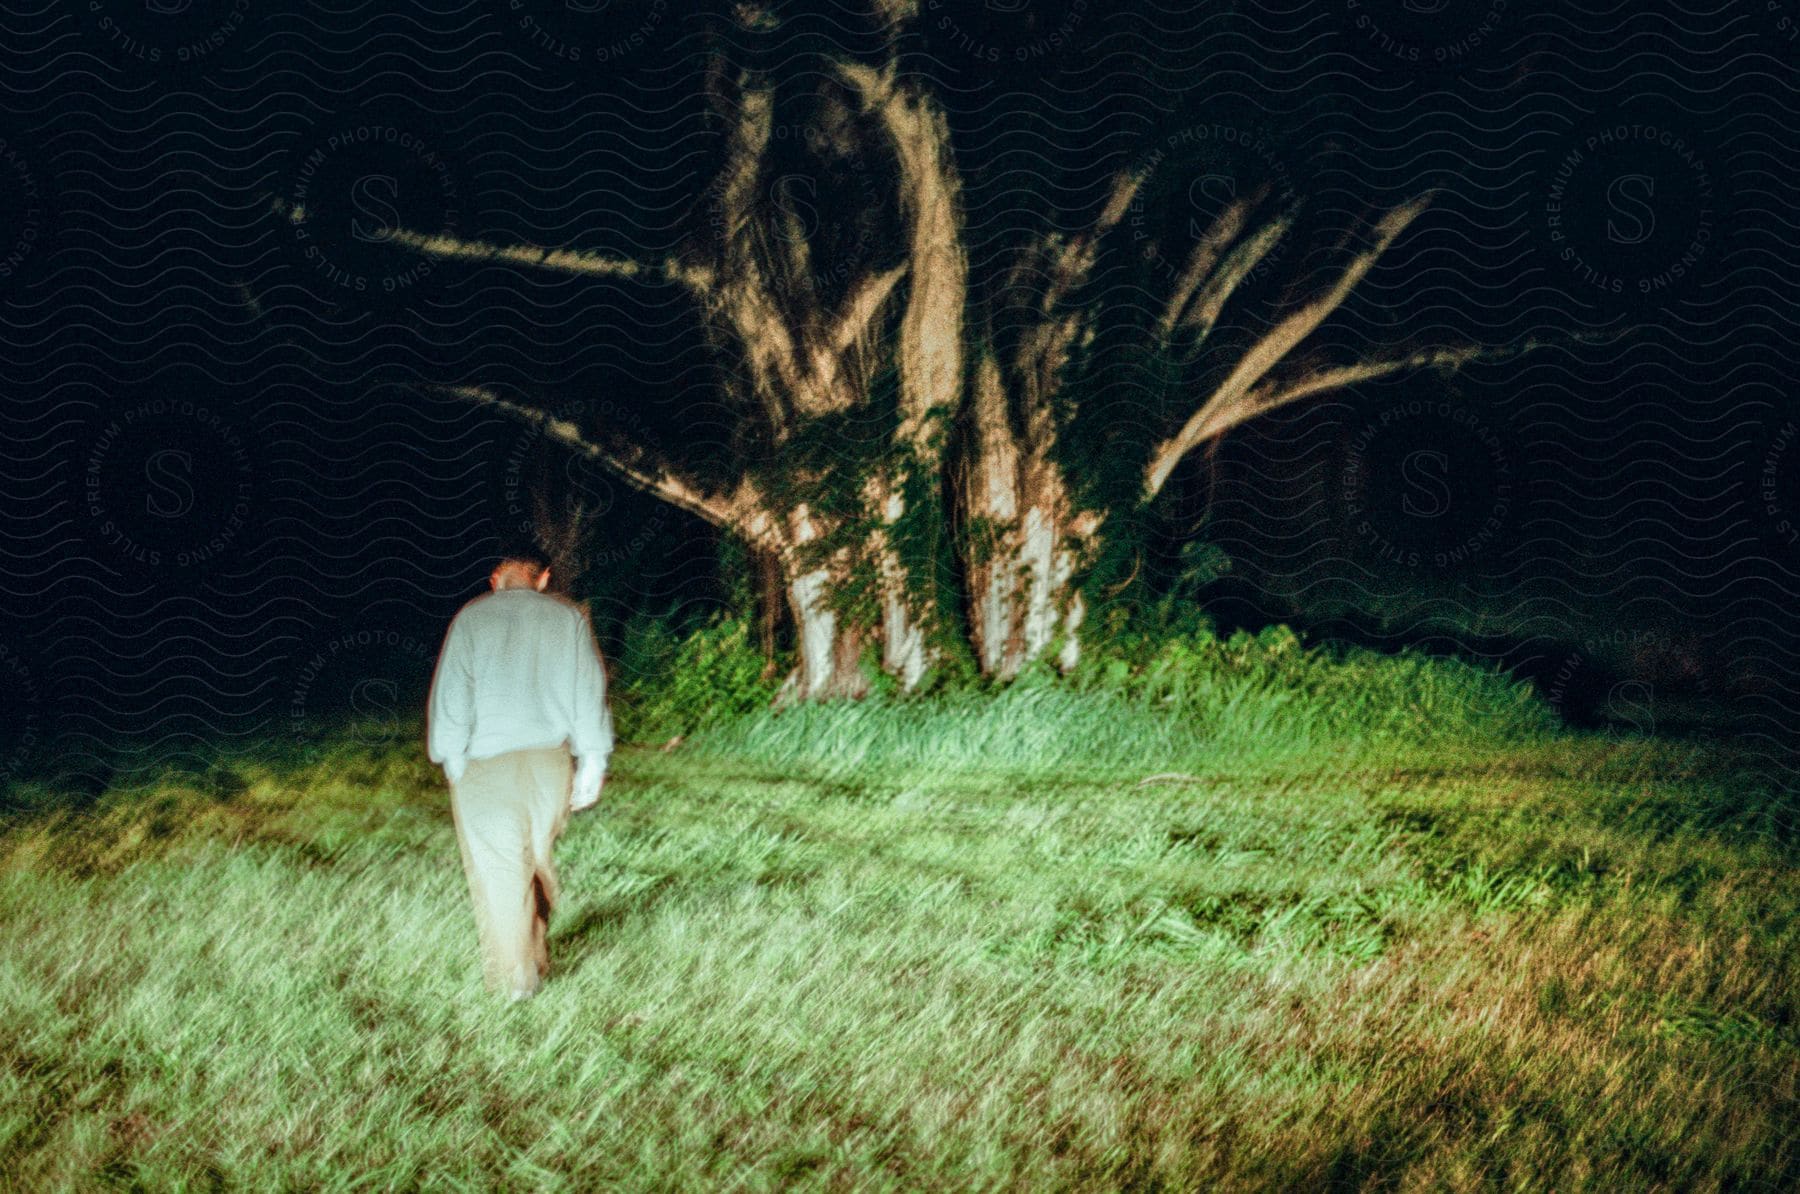 A blurry man walking toward a lit up tree at night time